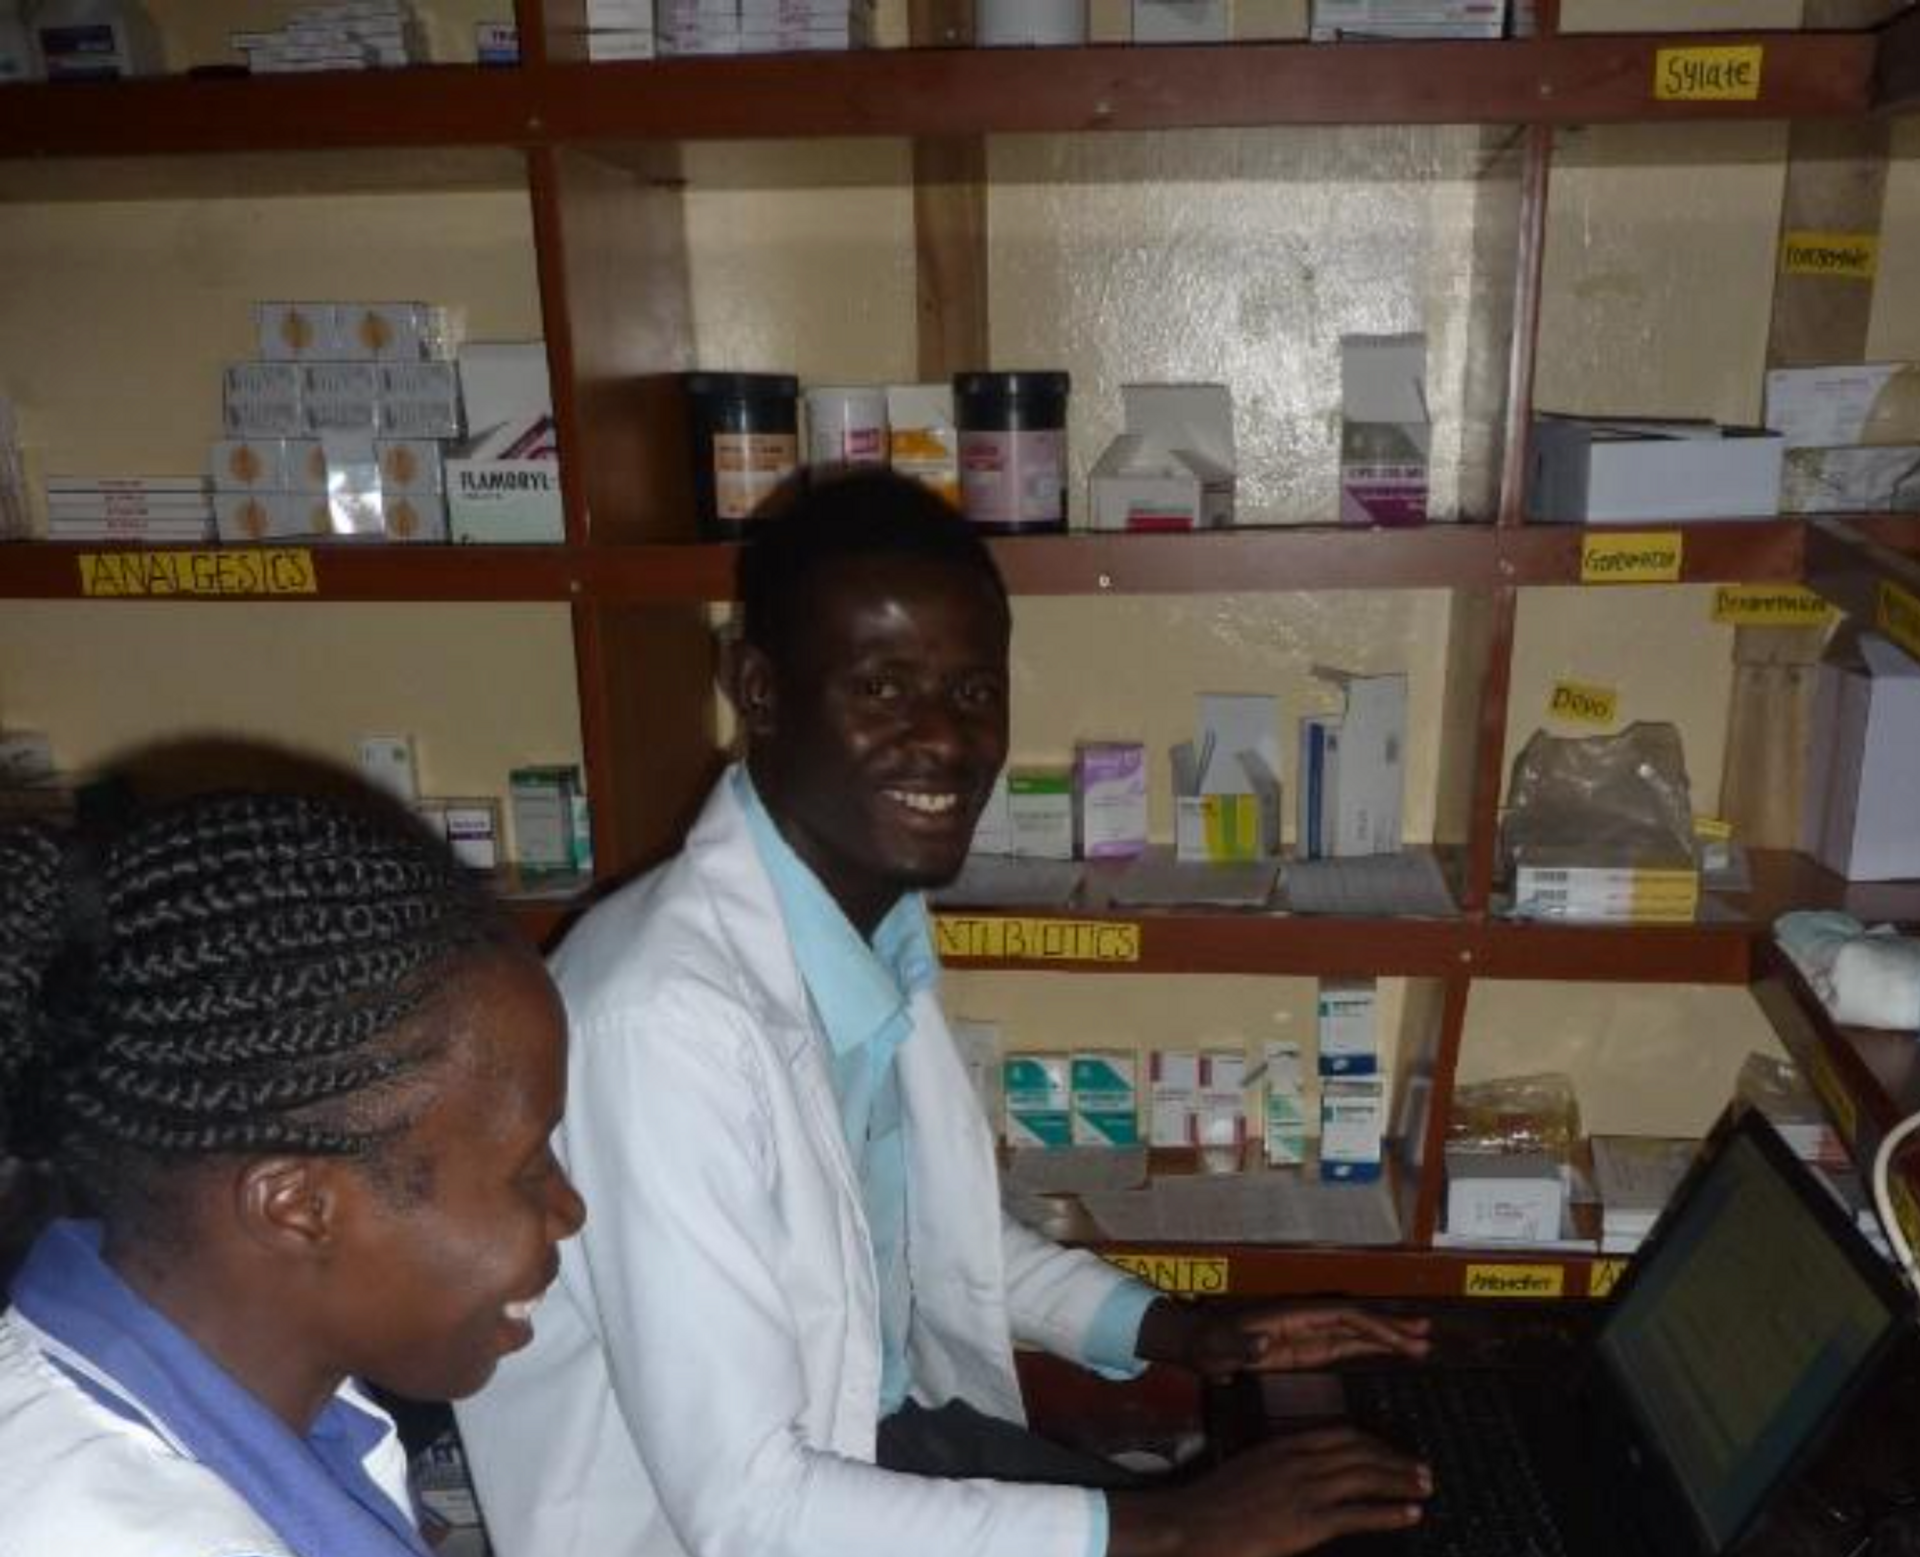 The Pharmacy. Brian is an Orphan and was one of W.O.R.K.'s Students. He is now a Qualified Pharmacist and here he is at work!